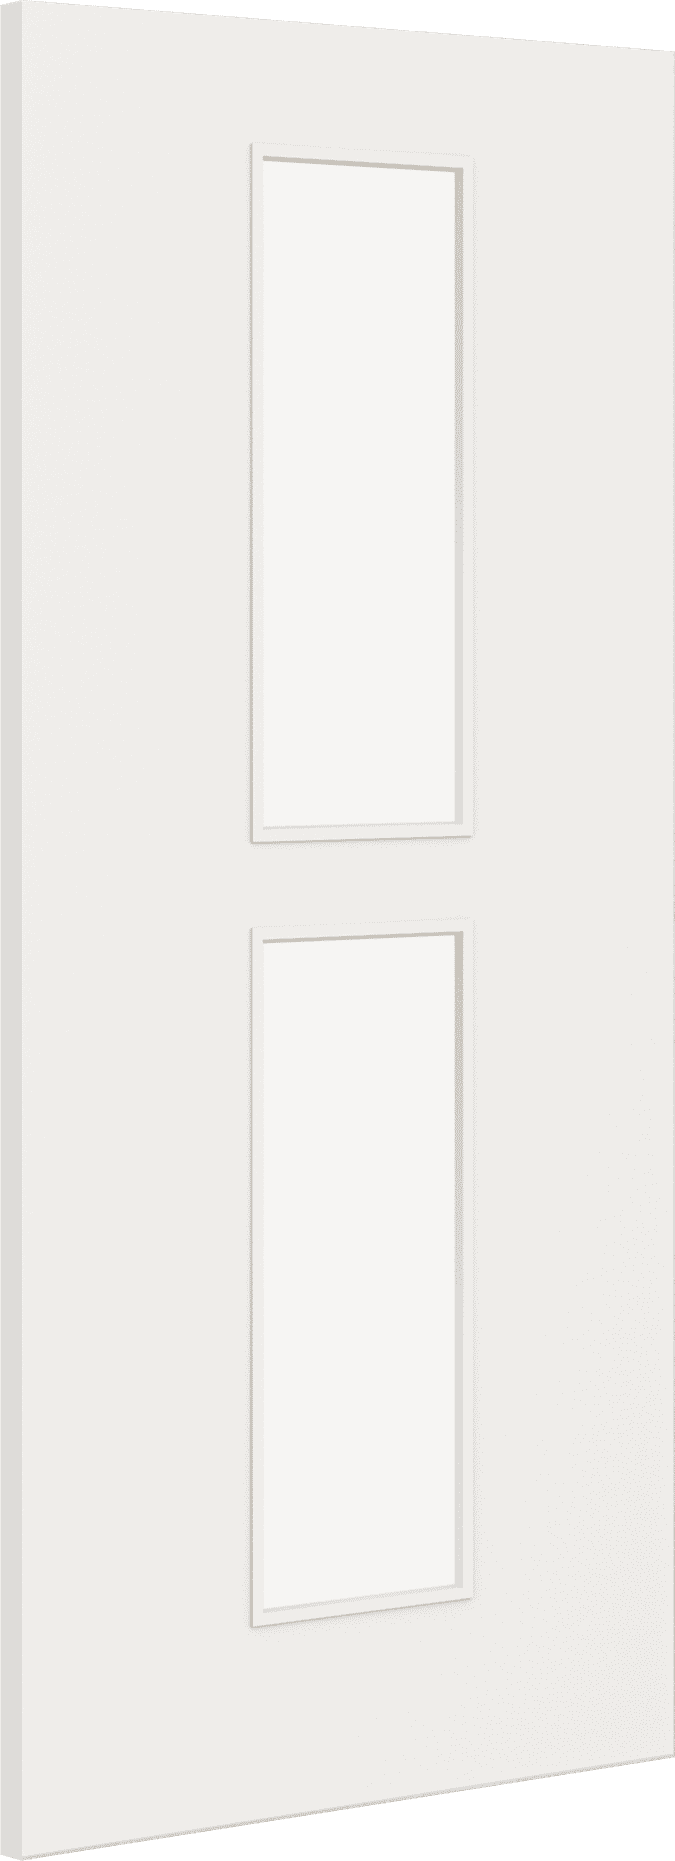 2040mm x 626mm x 44mm Architectural Paint Grade White 12 Frosted Glazed Fire Door Blank